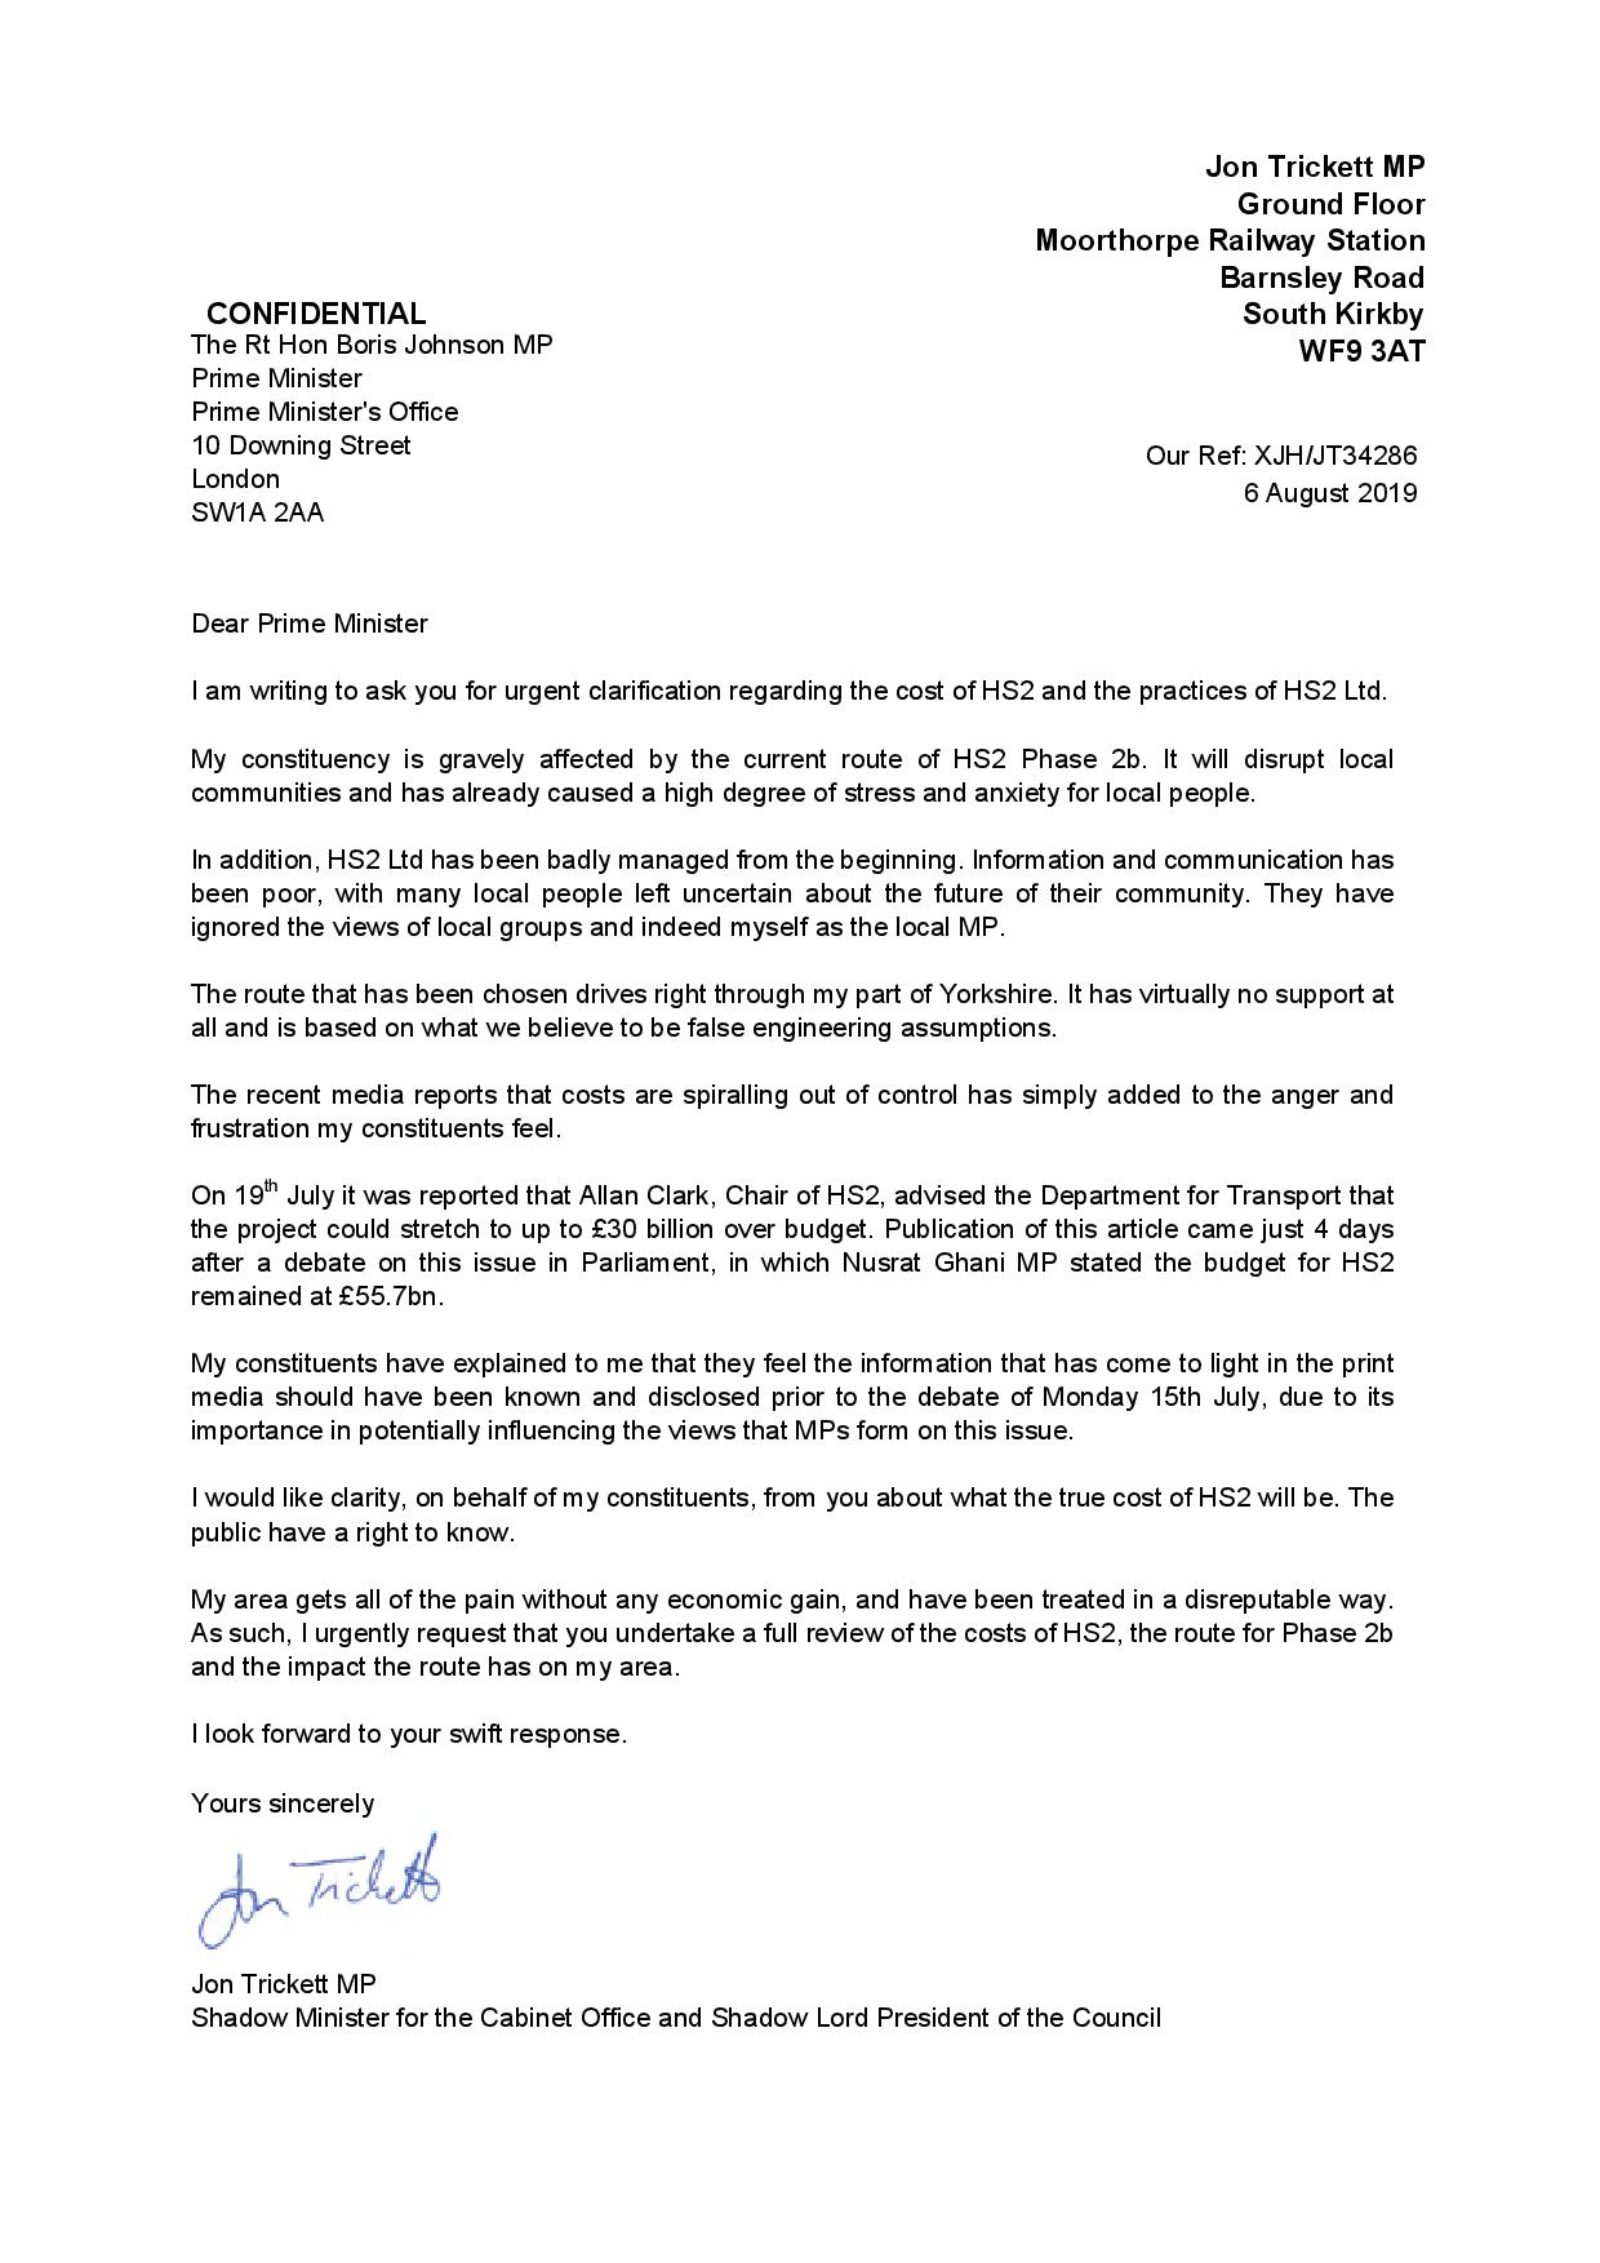 Letter to the PM